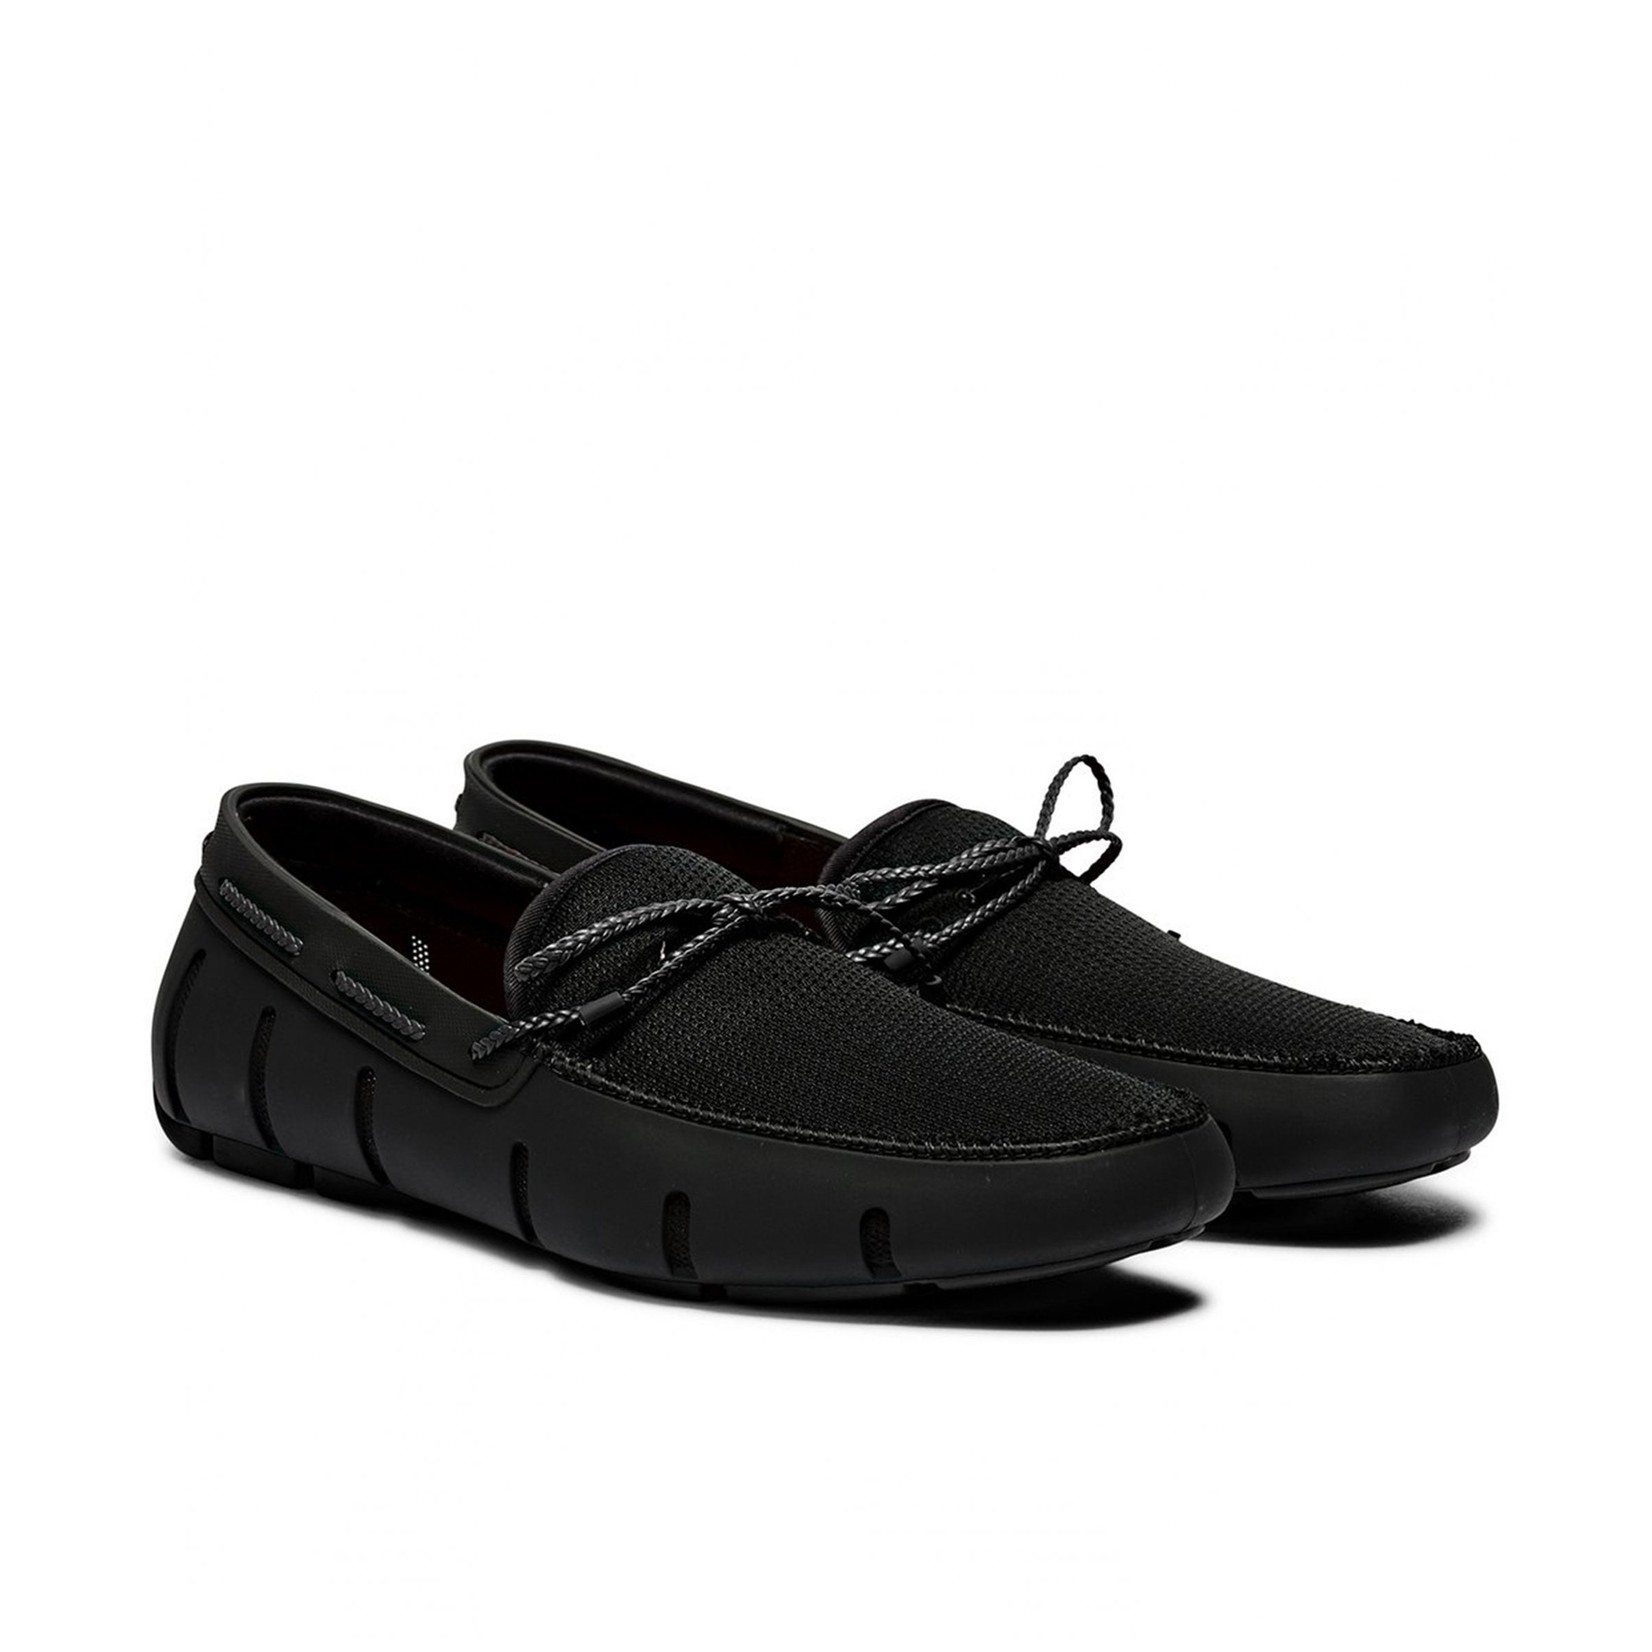 SWIMS BRAIDED LACE LOAFER - BLACK 21215